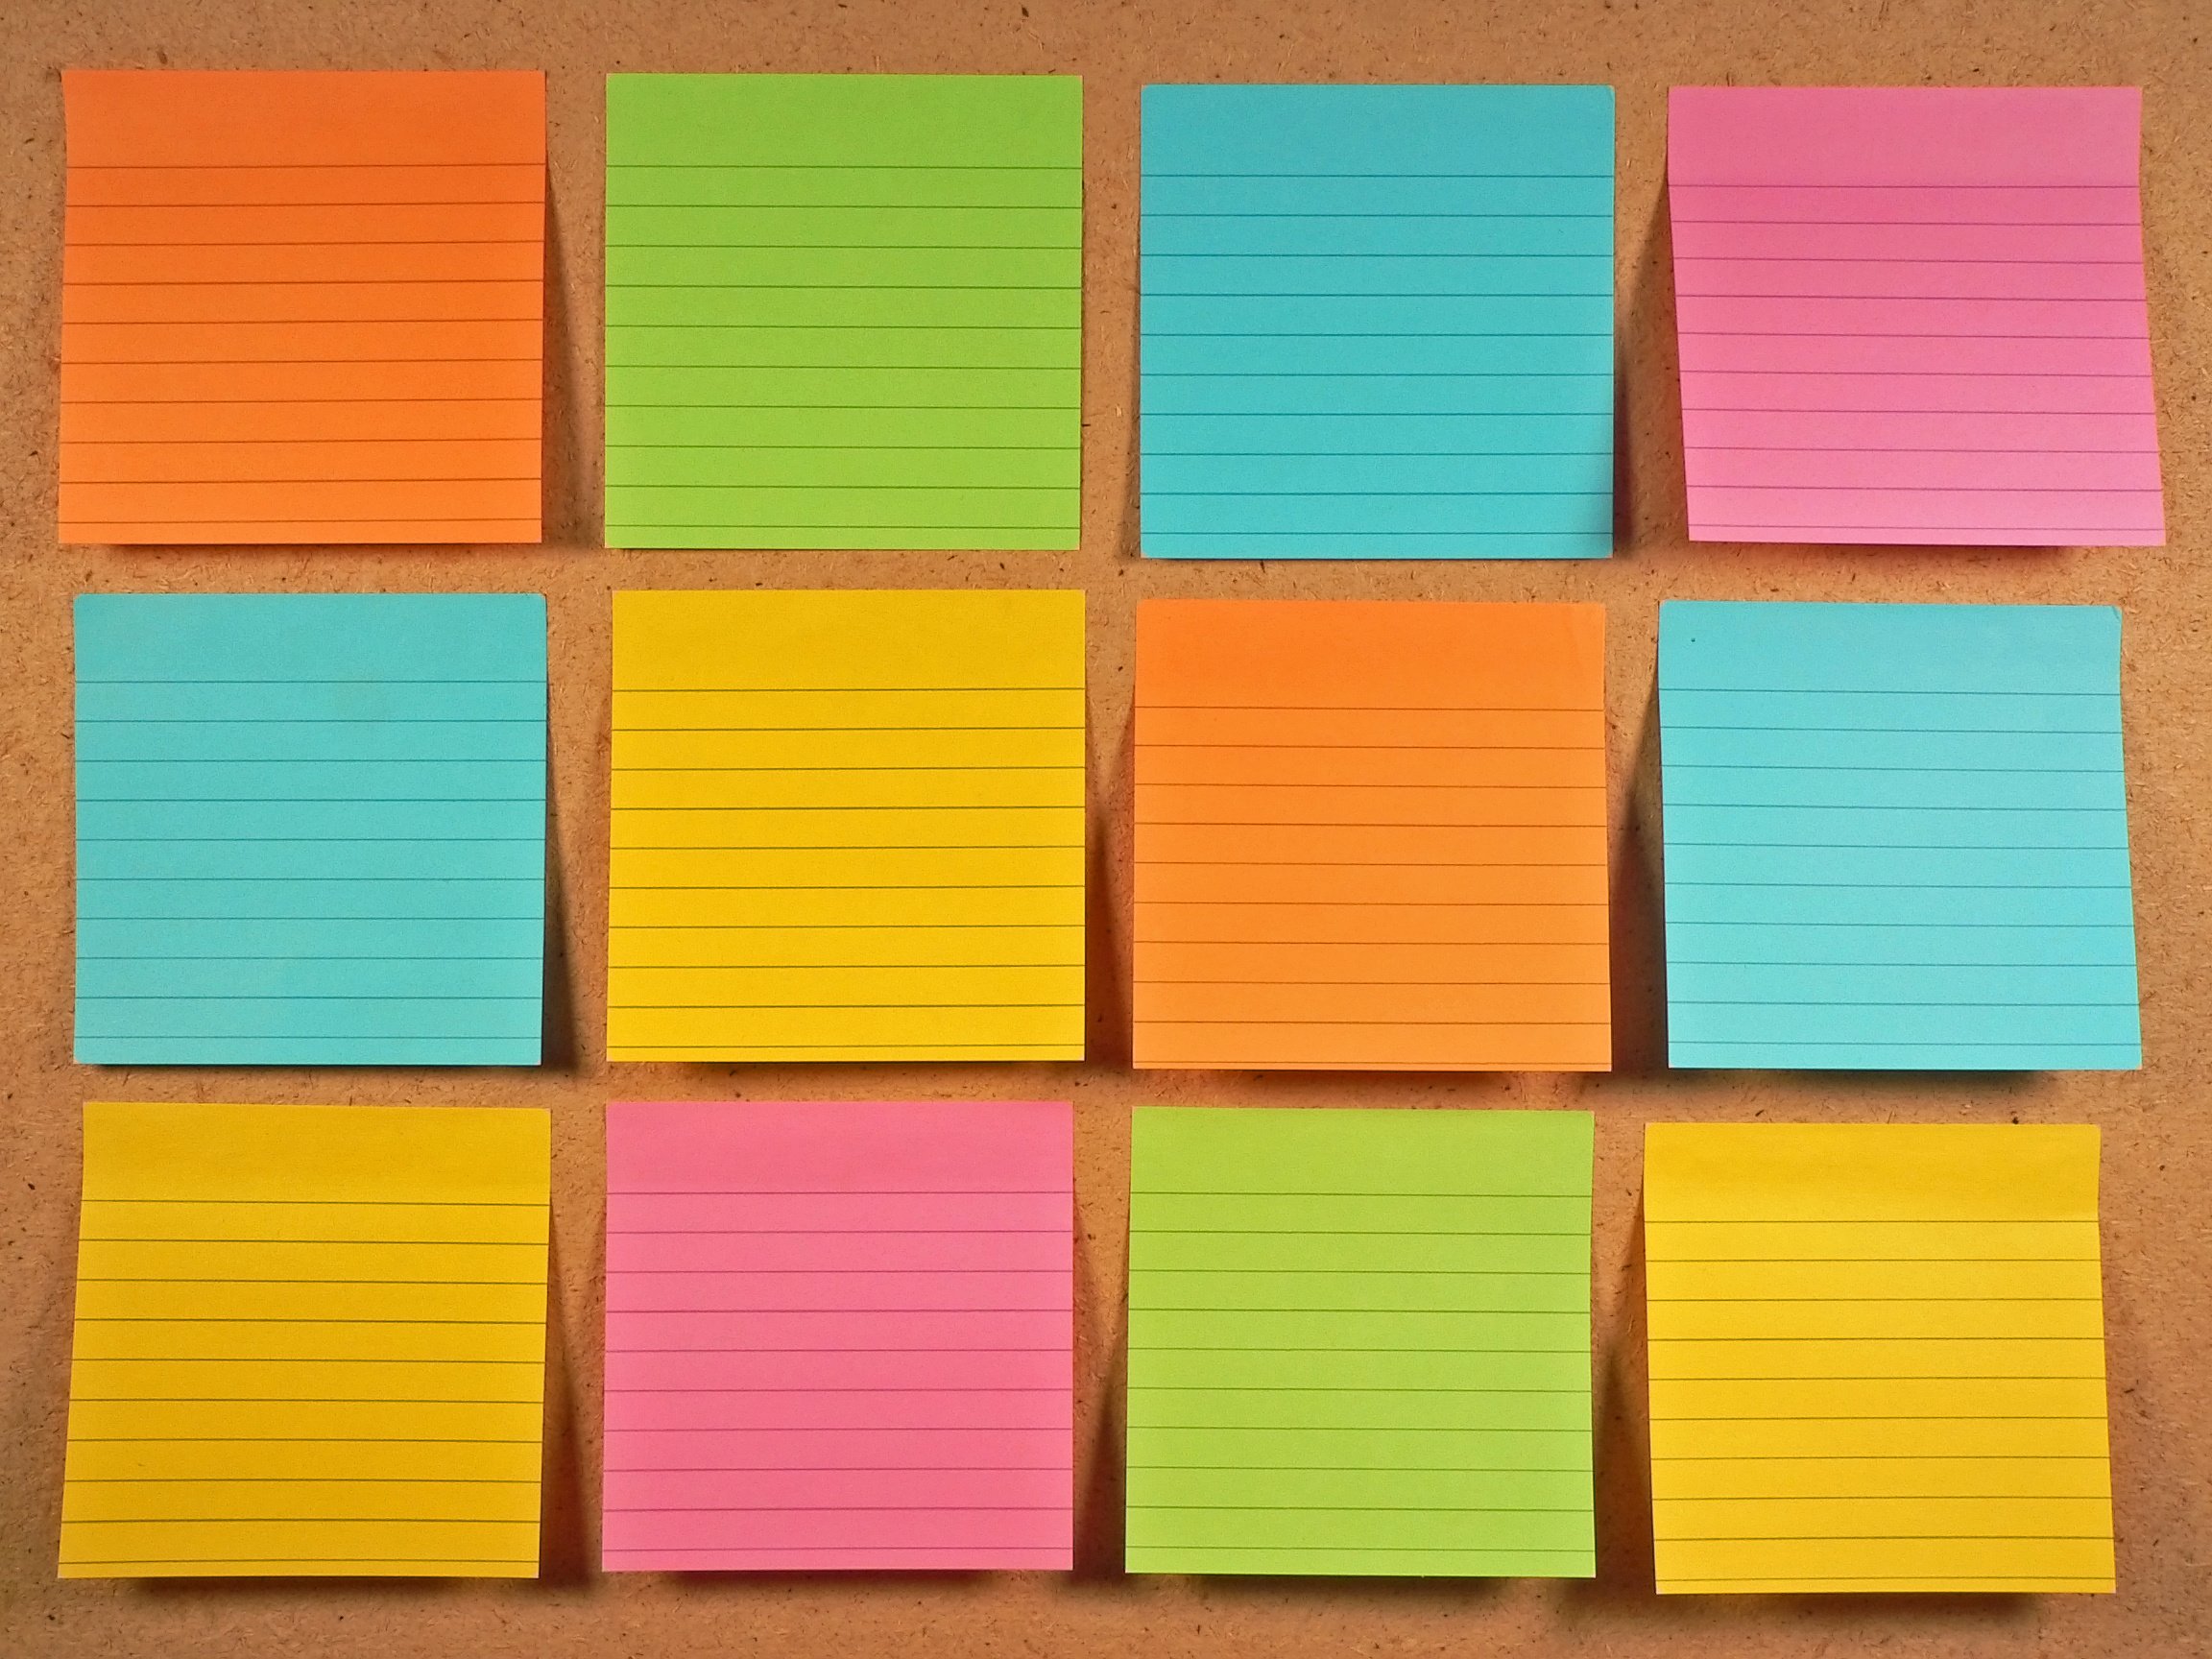 Free download Sticky Notes Full Color Wallpaper 7913 Wallpaper ForWallpapercom [2304x1728] for your Desktop, Mobile & Tablet. Explore Sticky Wallpaper. Peel and Stick Wallpaper, Removable Wallpaper for Apartments, Peel